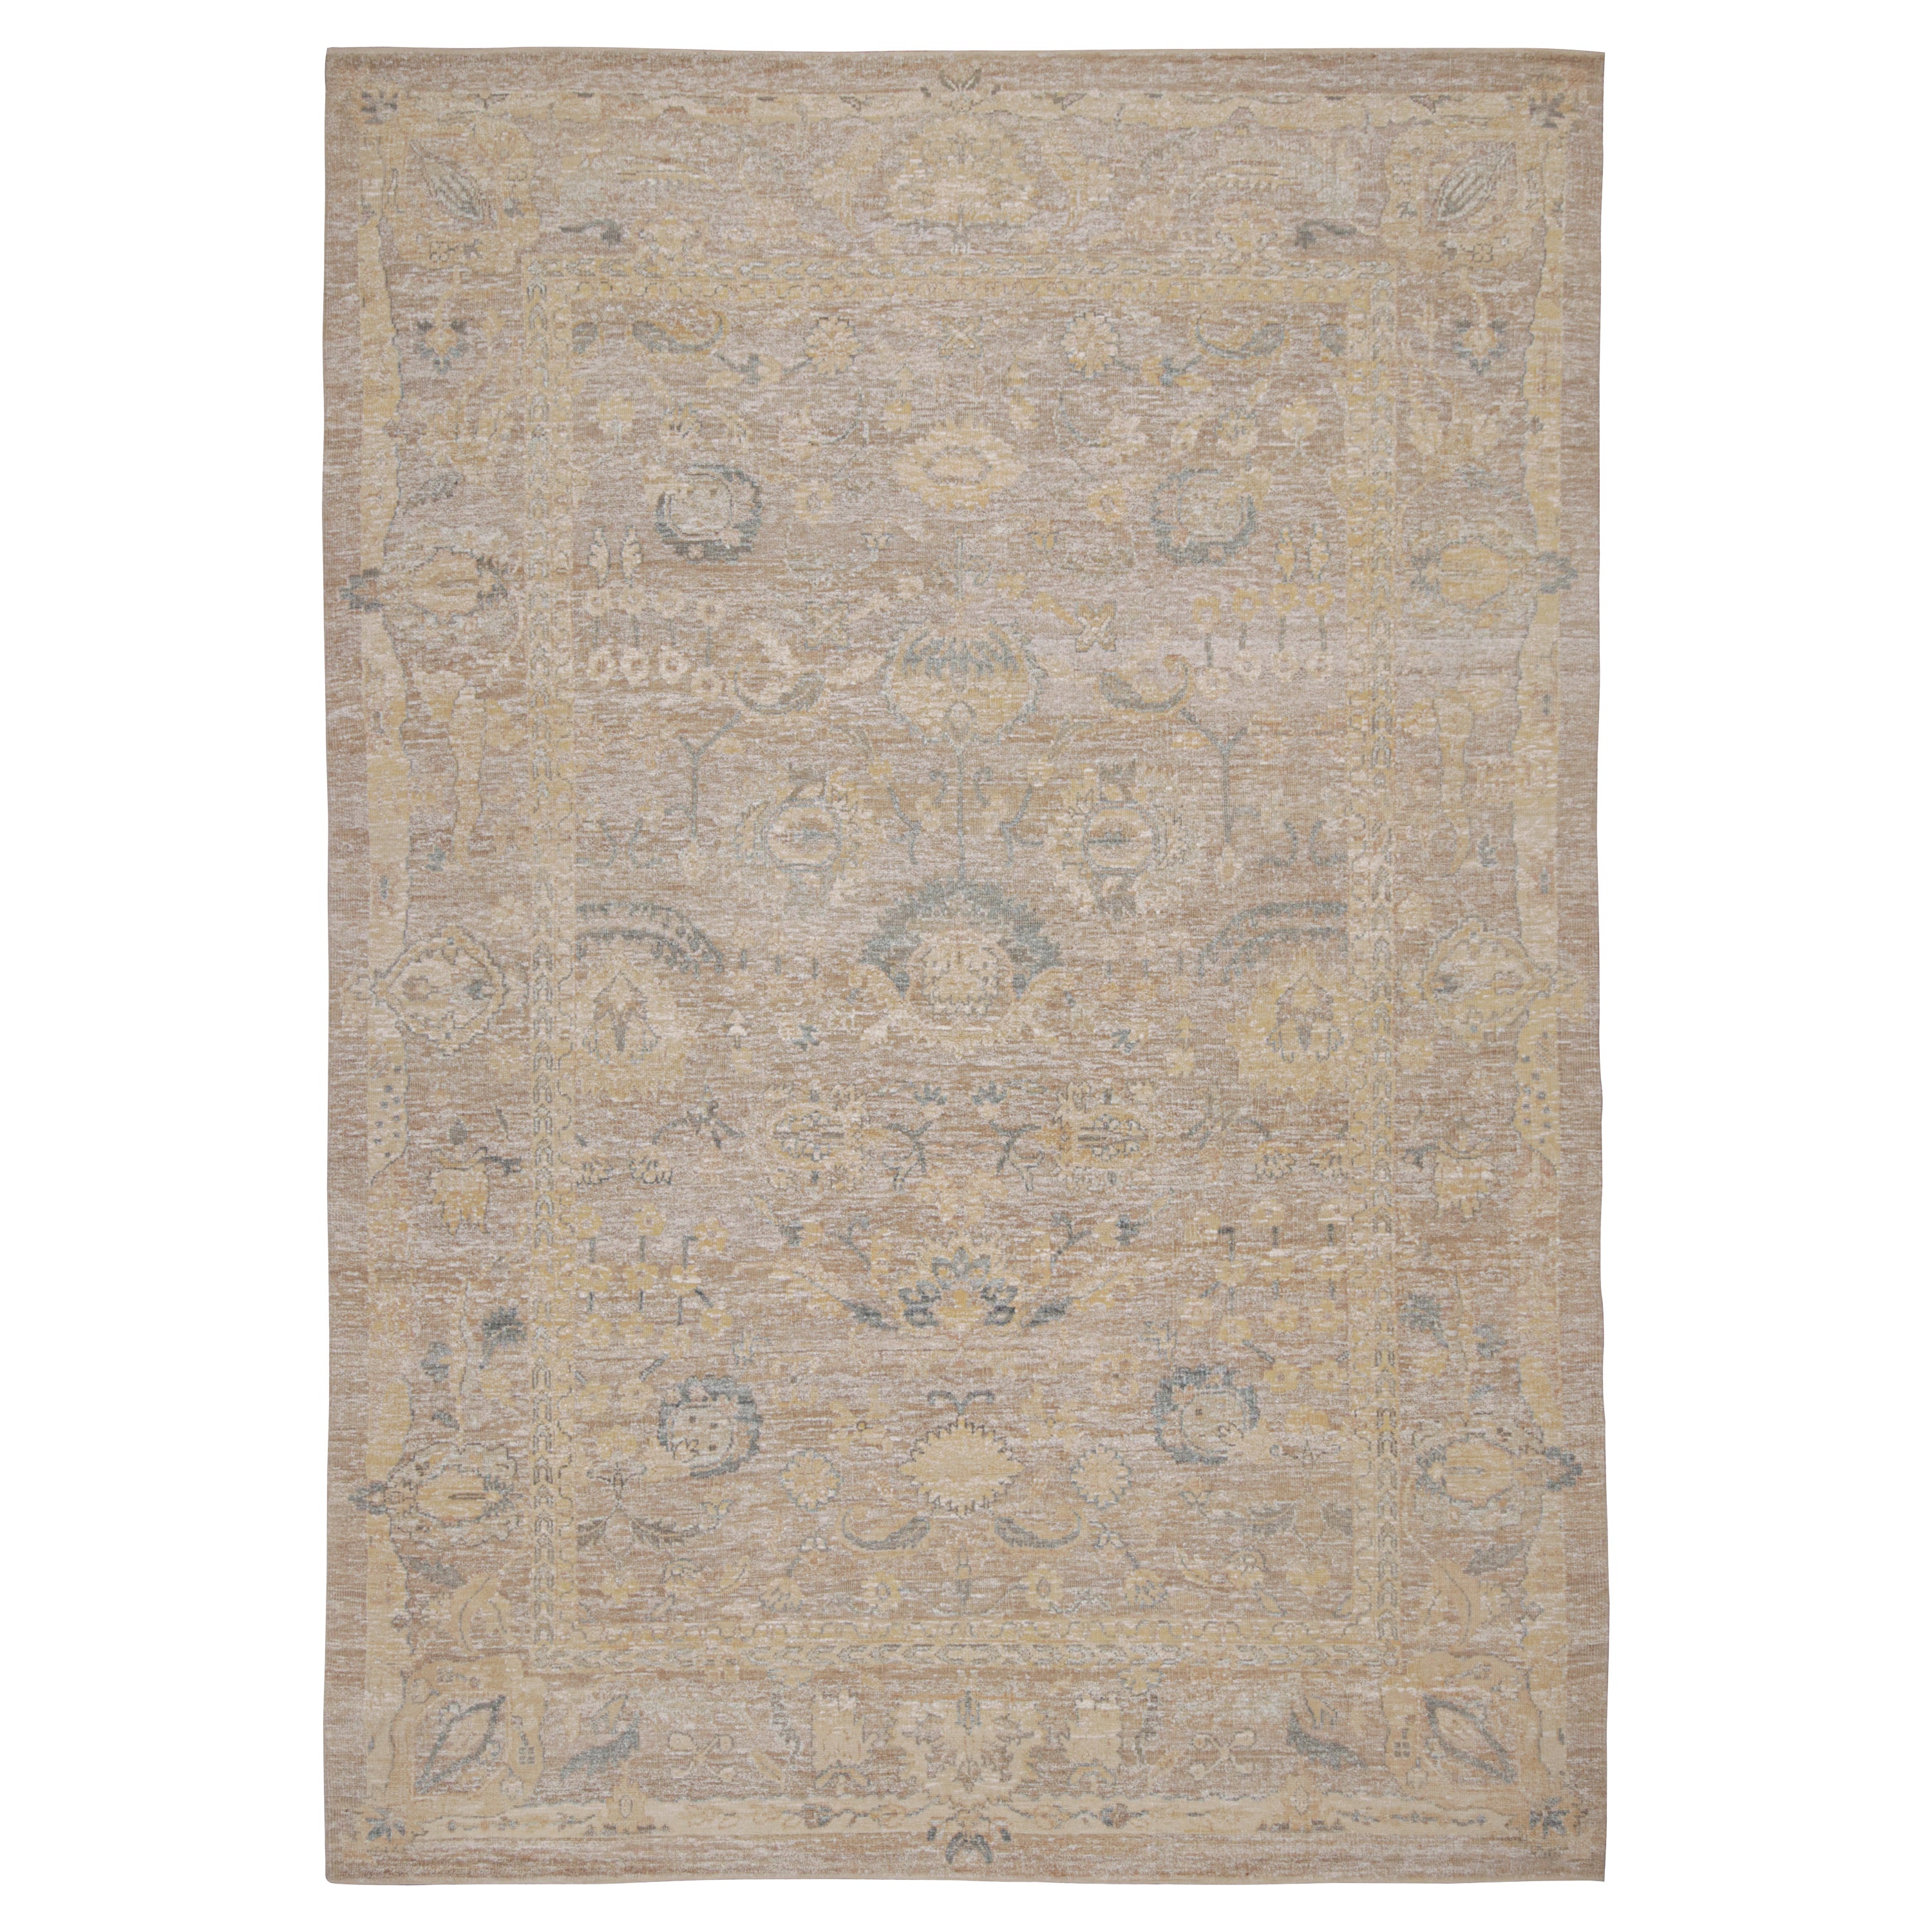 Rug & Kilim’s Oushak Style Rug with Beige-Brown, Blue and Gold Floral Patterns